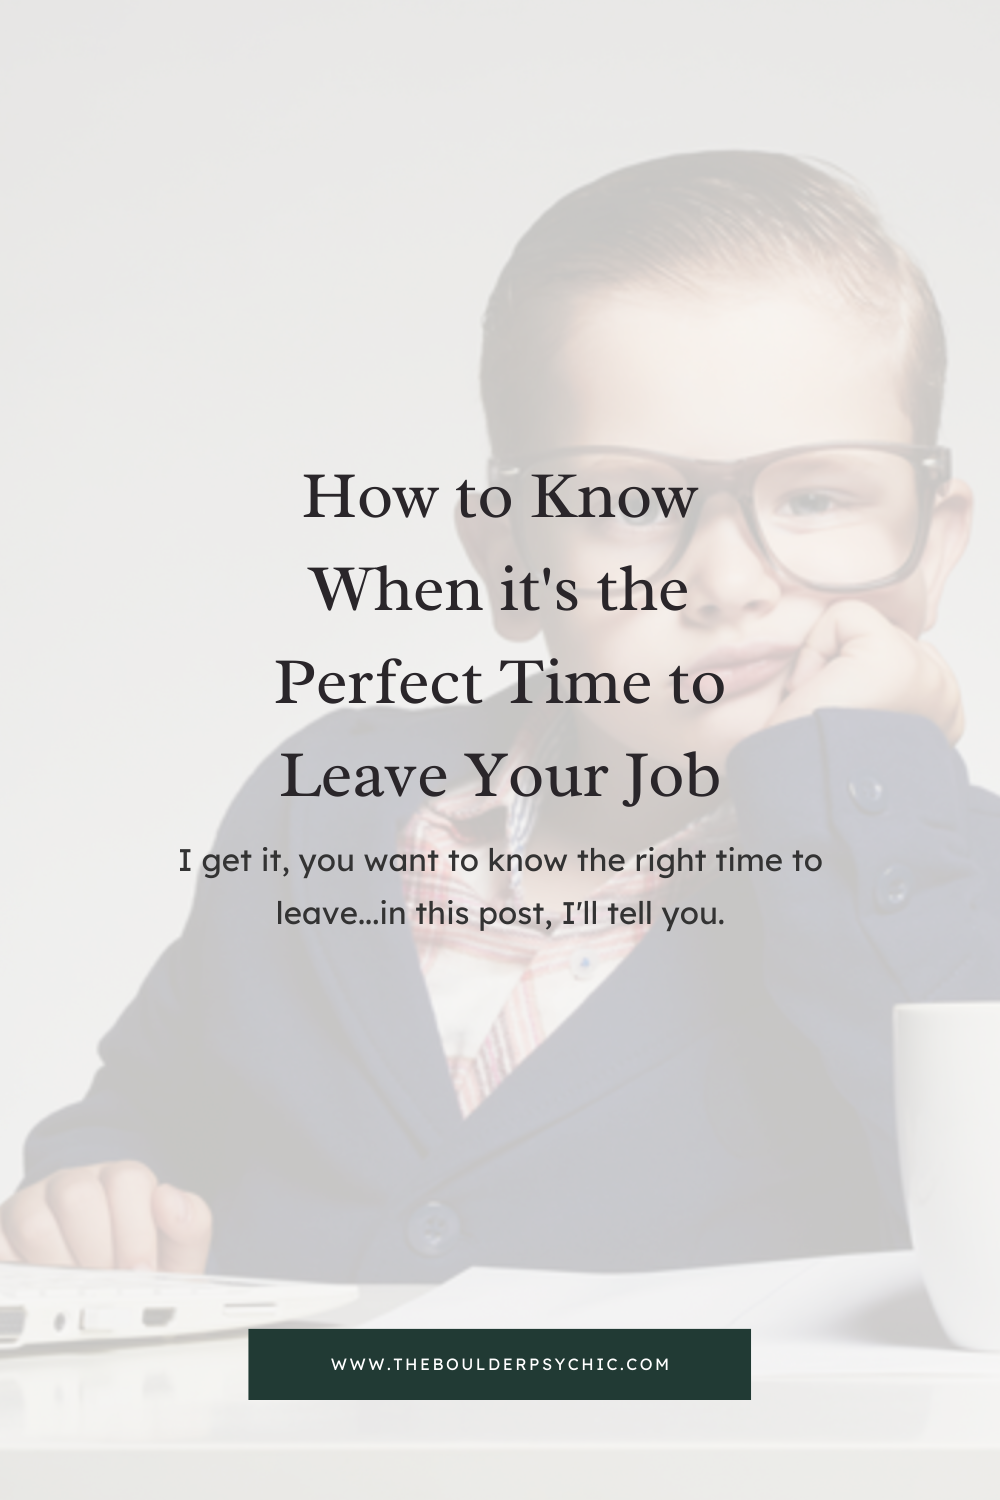 How to Know When it’s the Perfect Time to Leave Your Job